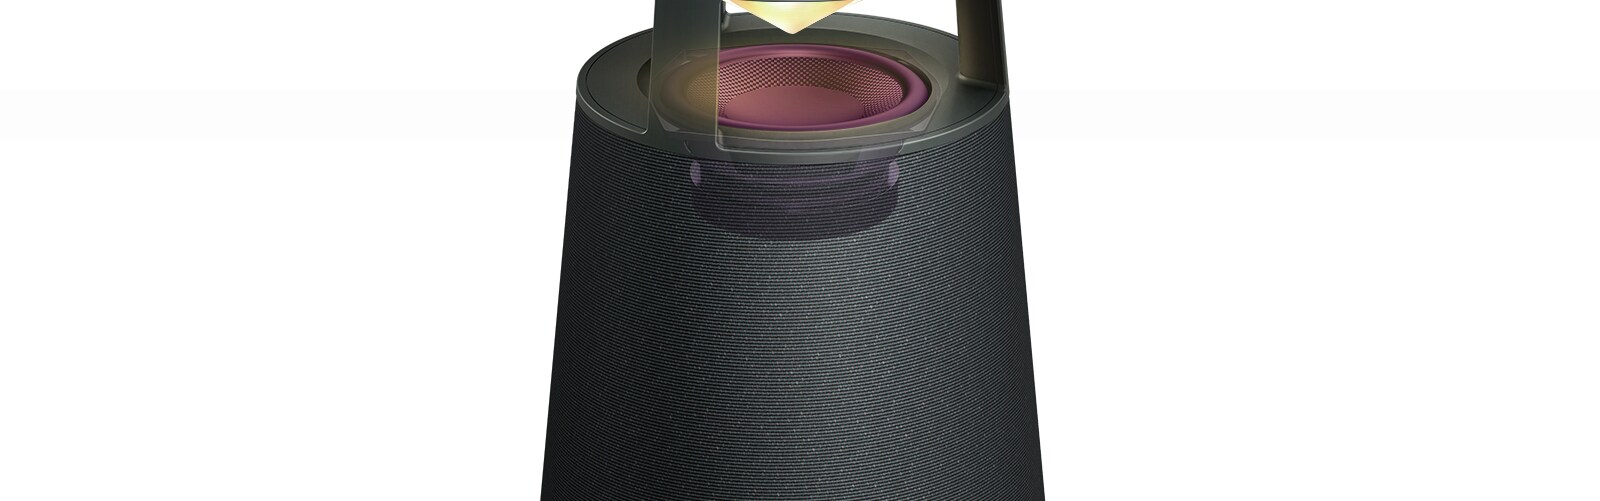 Image showing Glass fiber woofer unit in the middle of XBOOM 360.